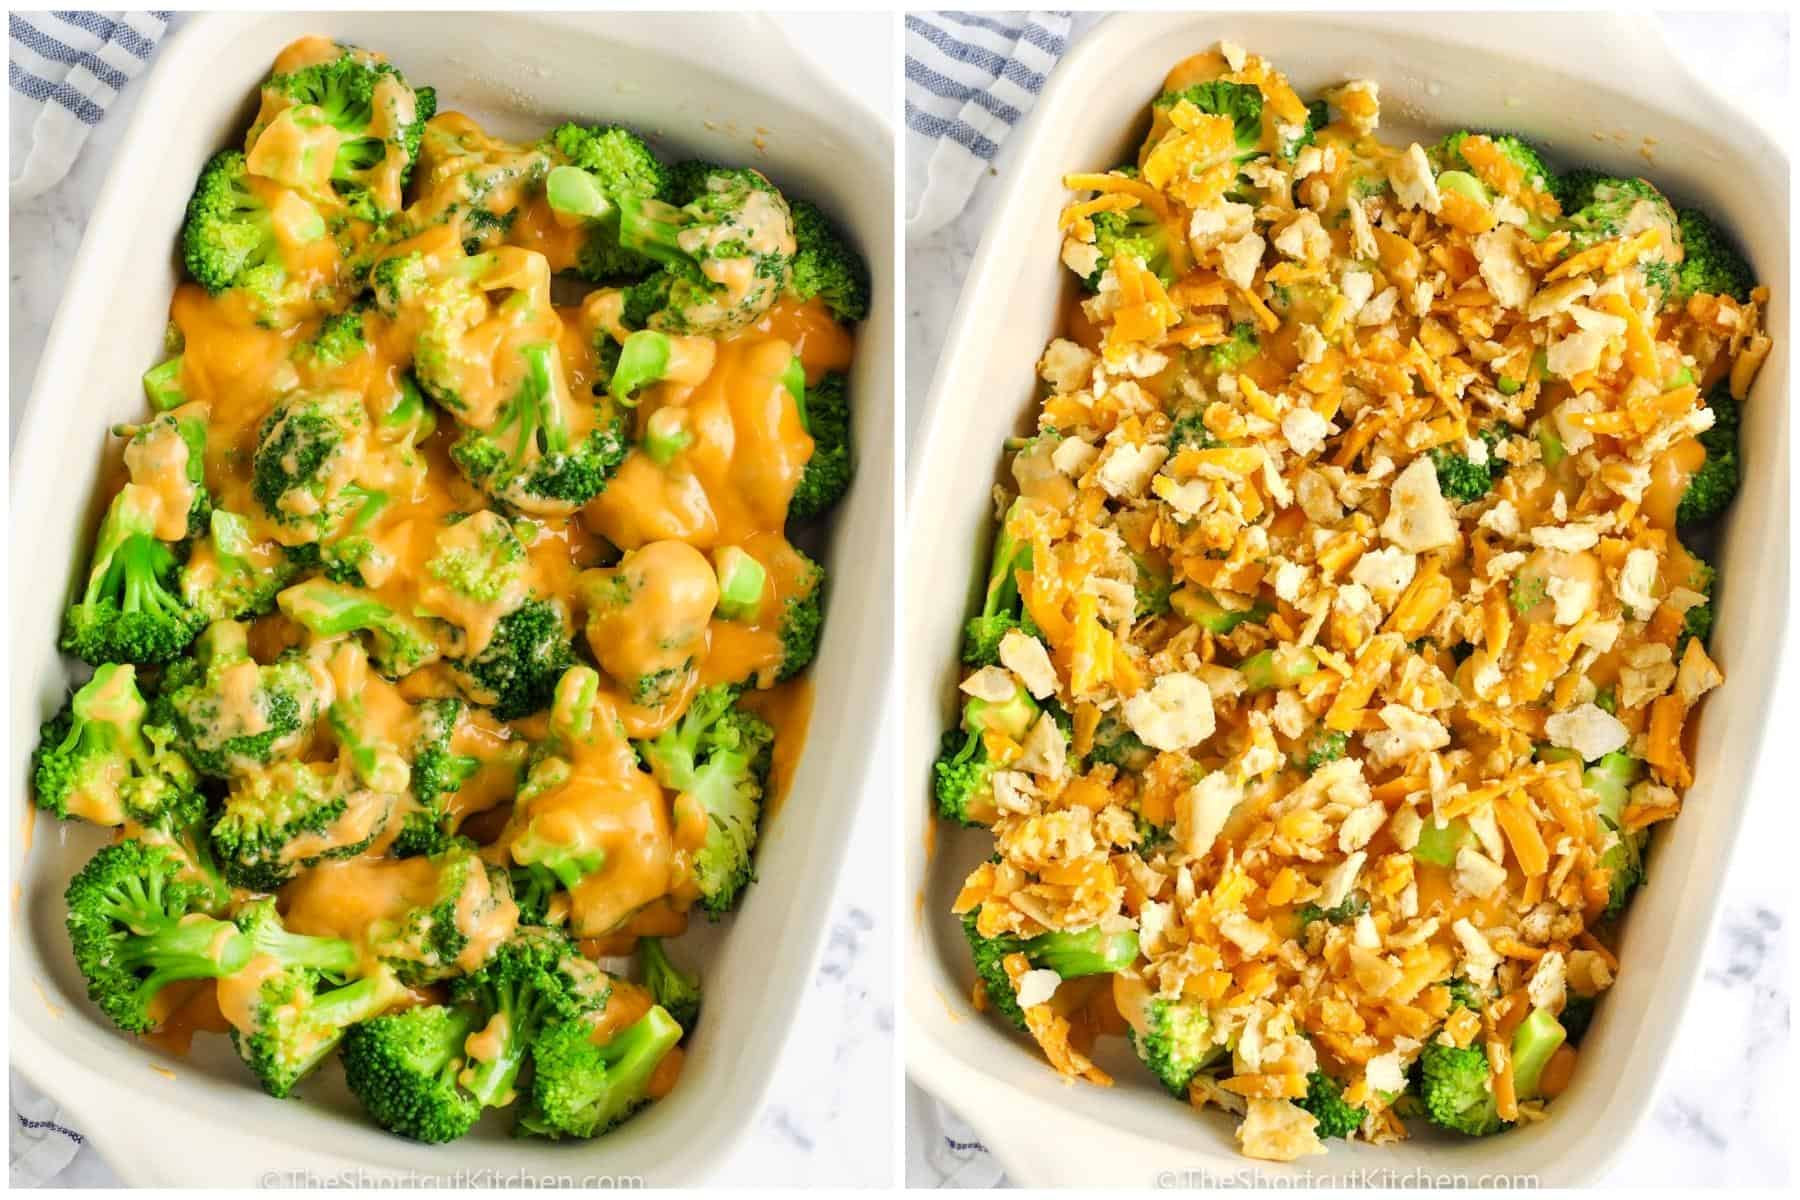 process of adding ingredients to broccoli to make Baked Broccoli and Cheese Casserole